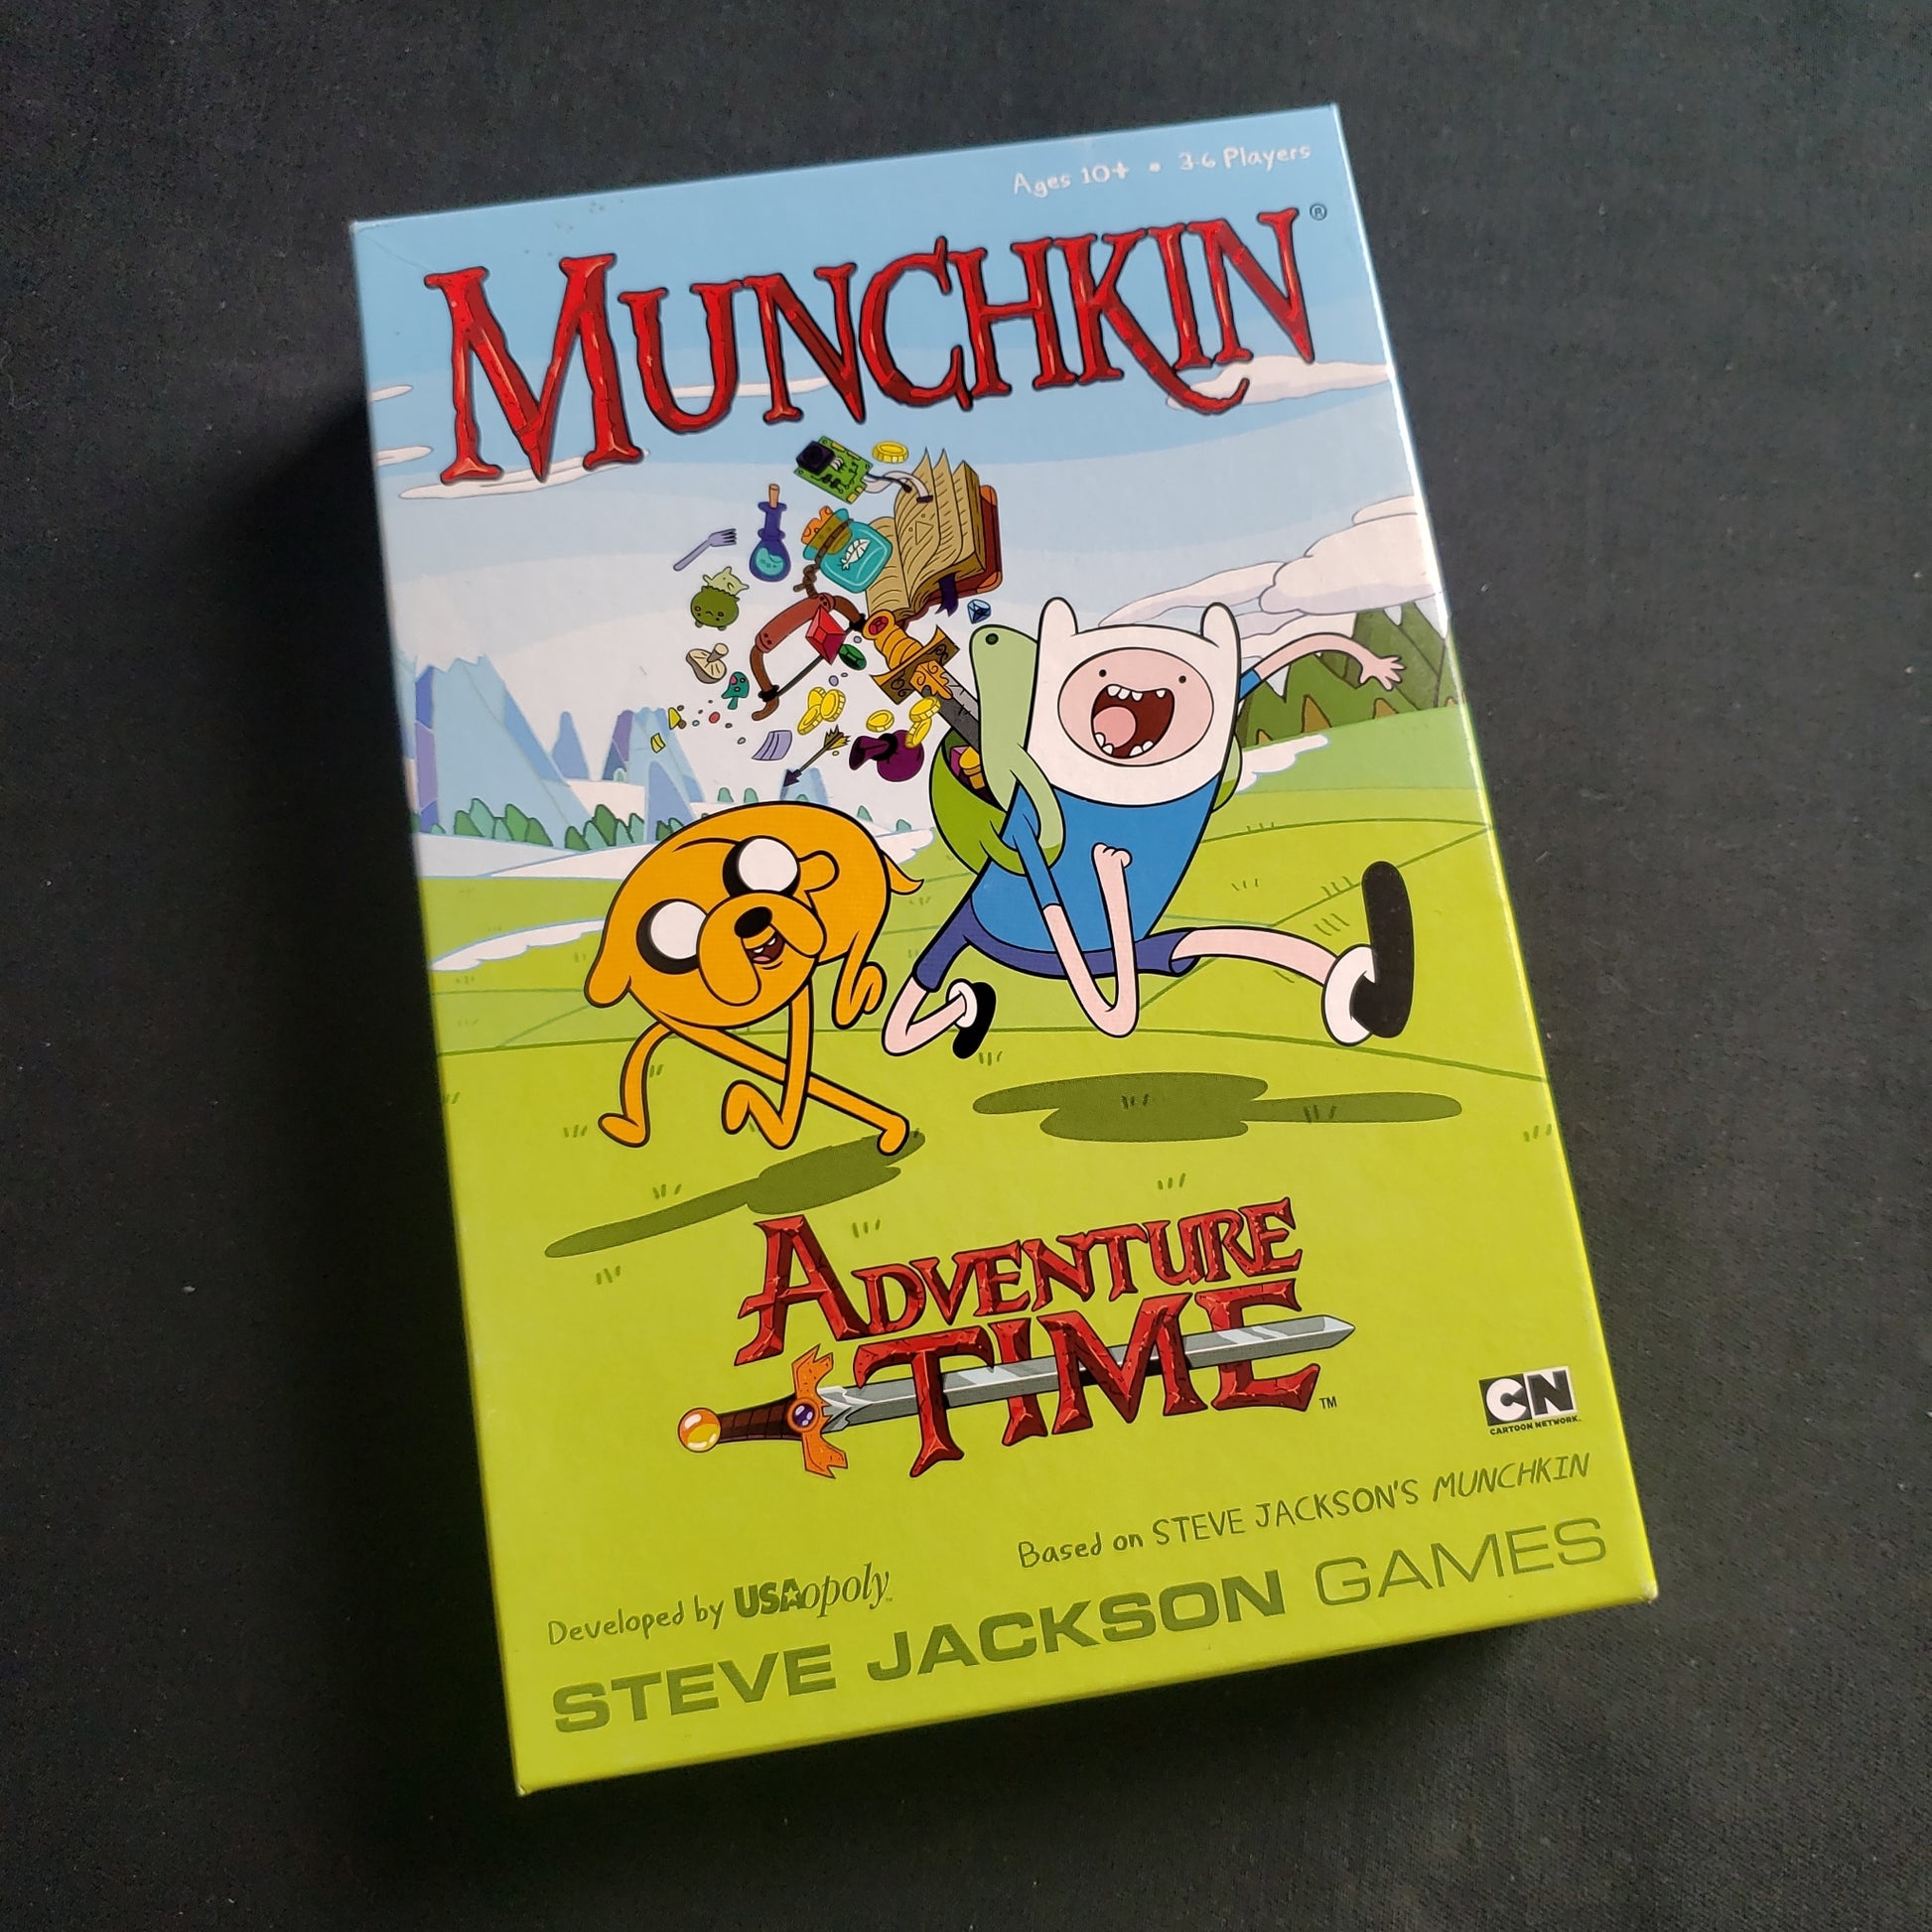 Image shows the front cover of the box of the Munchkin Adventure Time card game